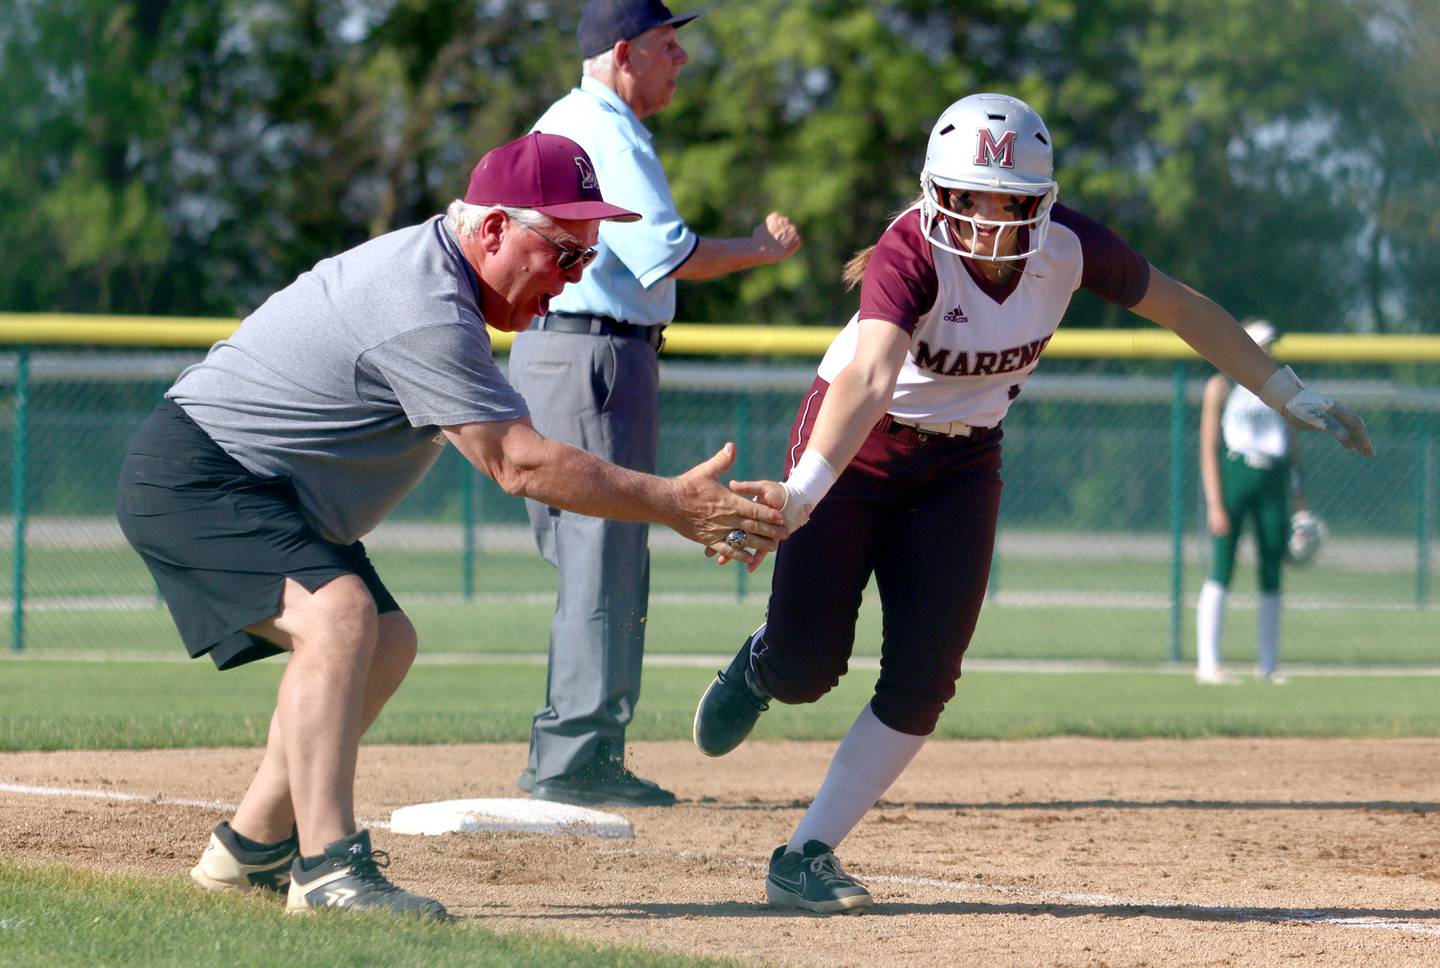 Marengo’s Gabby Christopher is greeted by third base coach Rob Jasinski on a Christopher home run against North Boone in IHSA Softball Class 2A Regional Championship action at Marengo Friday.